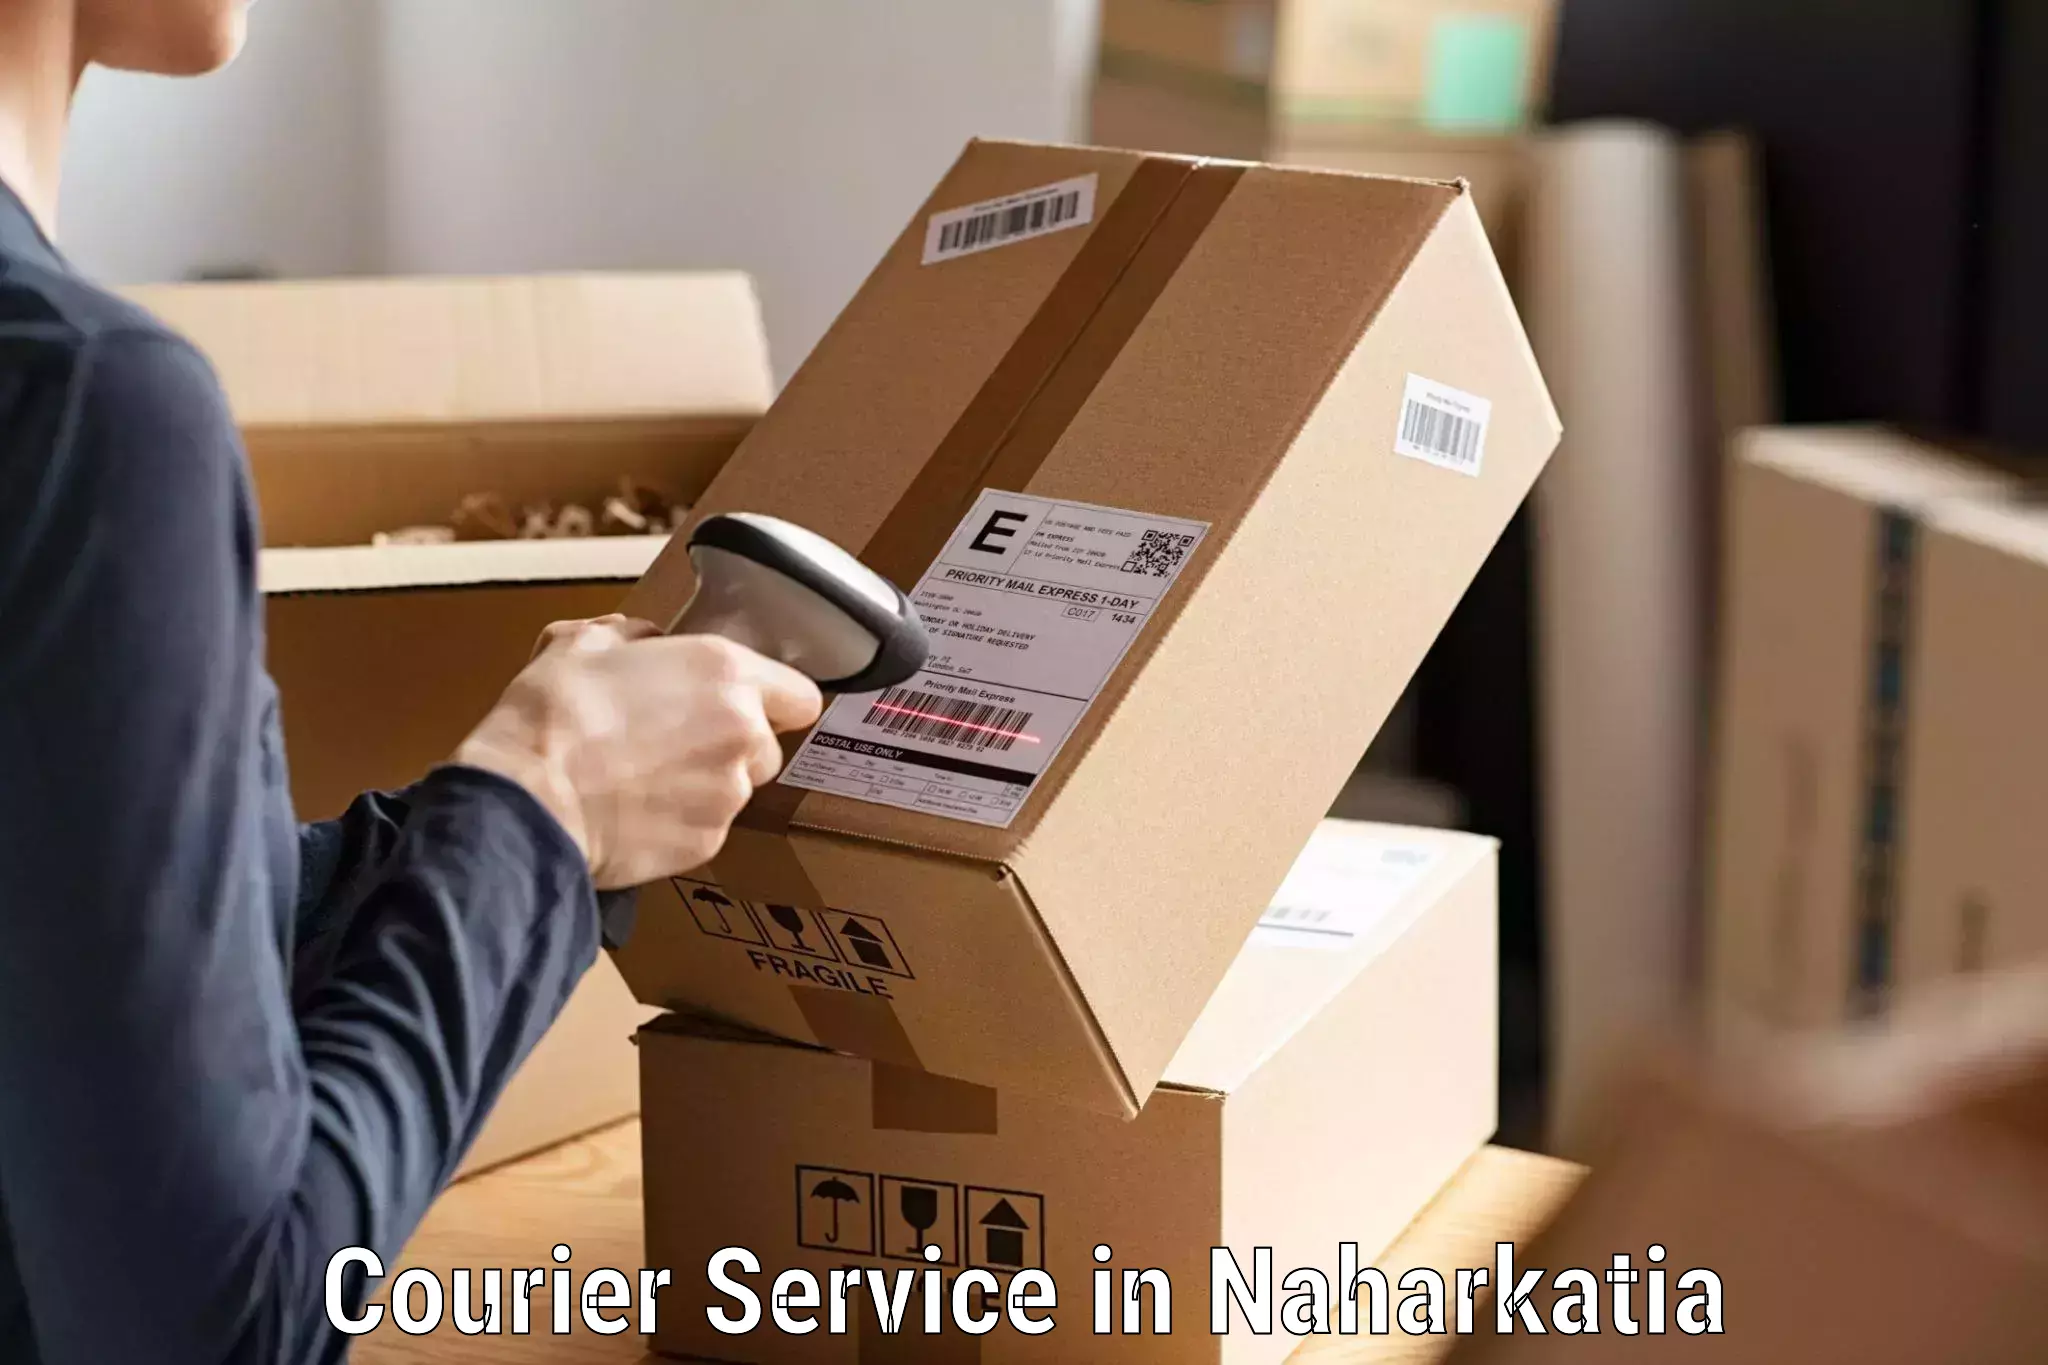 Cash on delivery service in Naharkatia